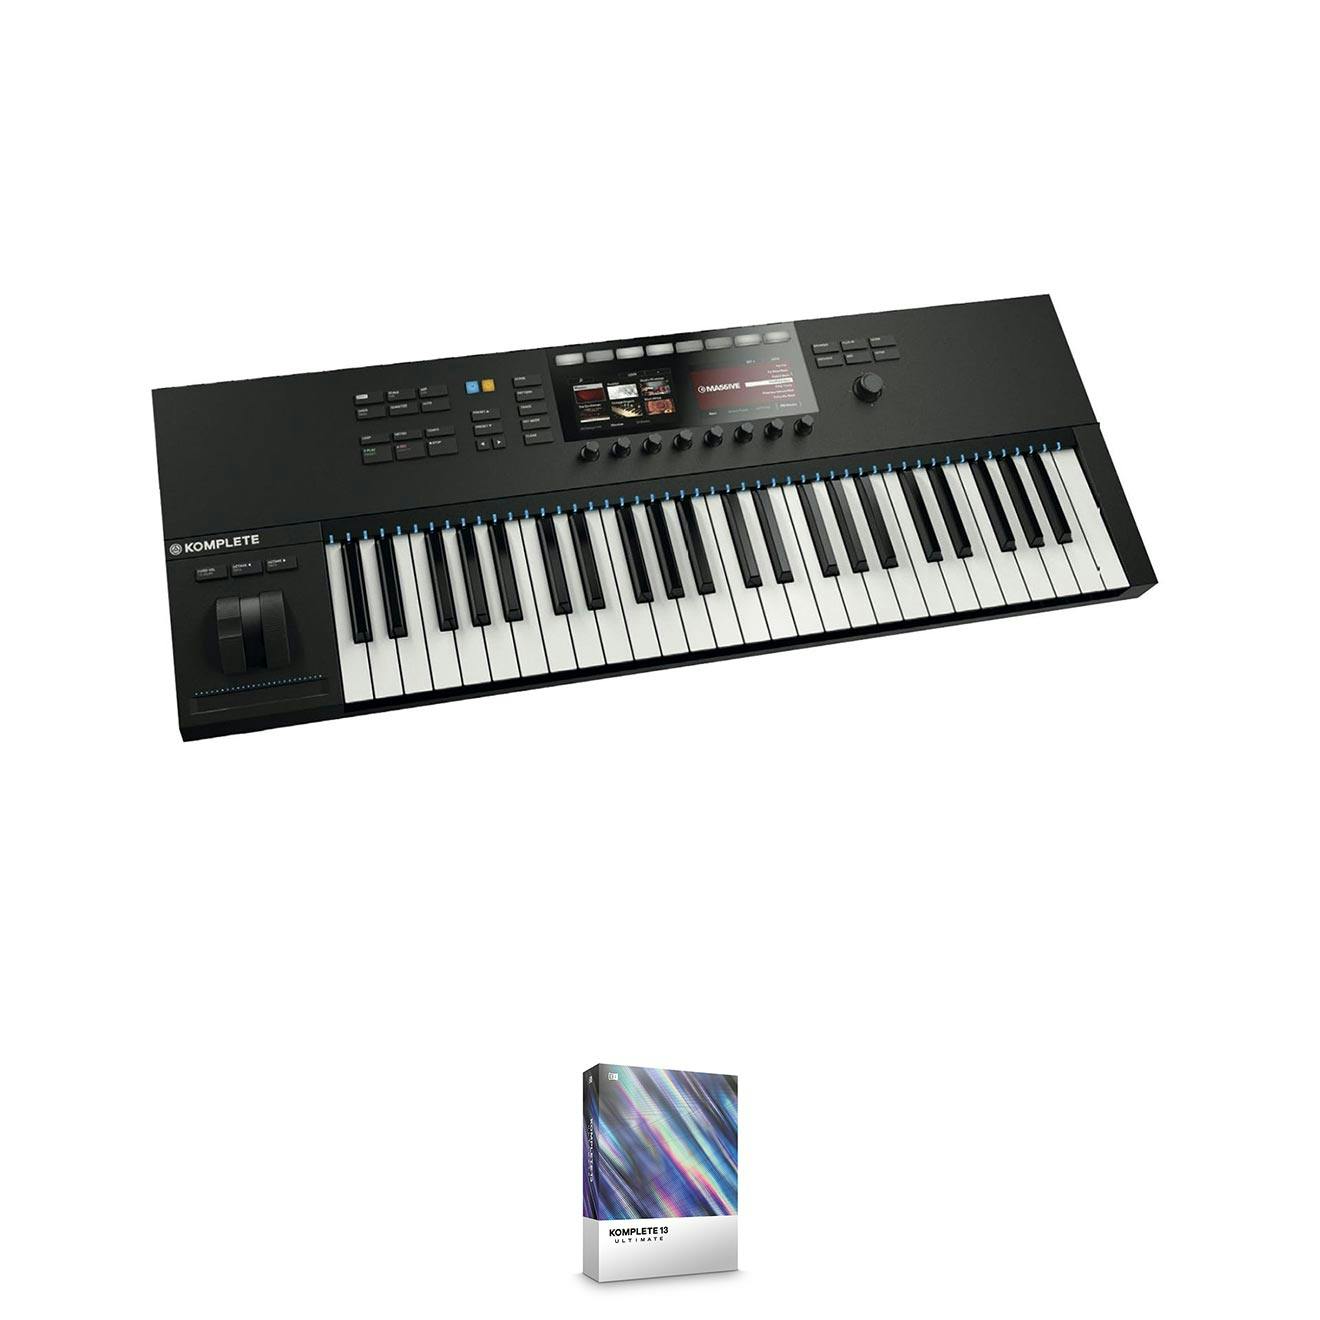 keyboard that works with massive native instruments